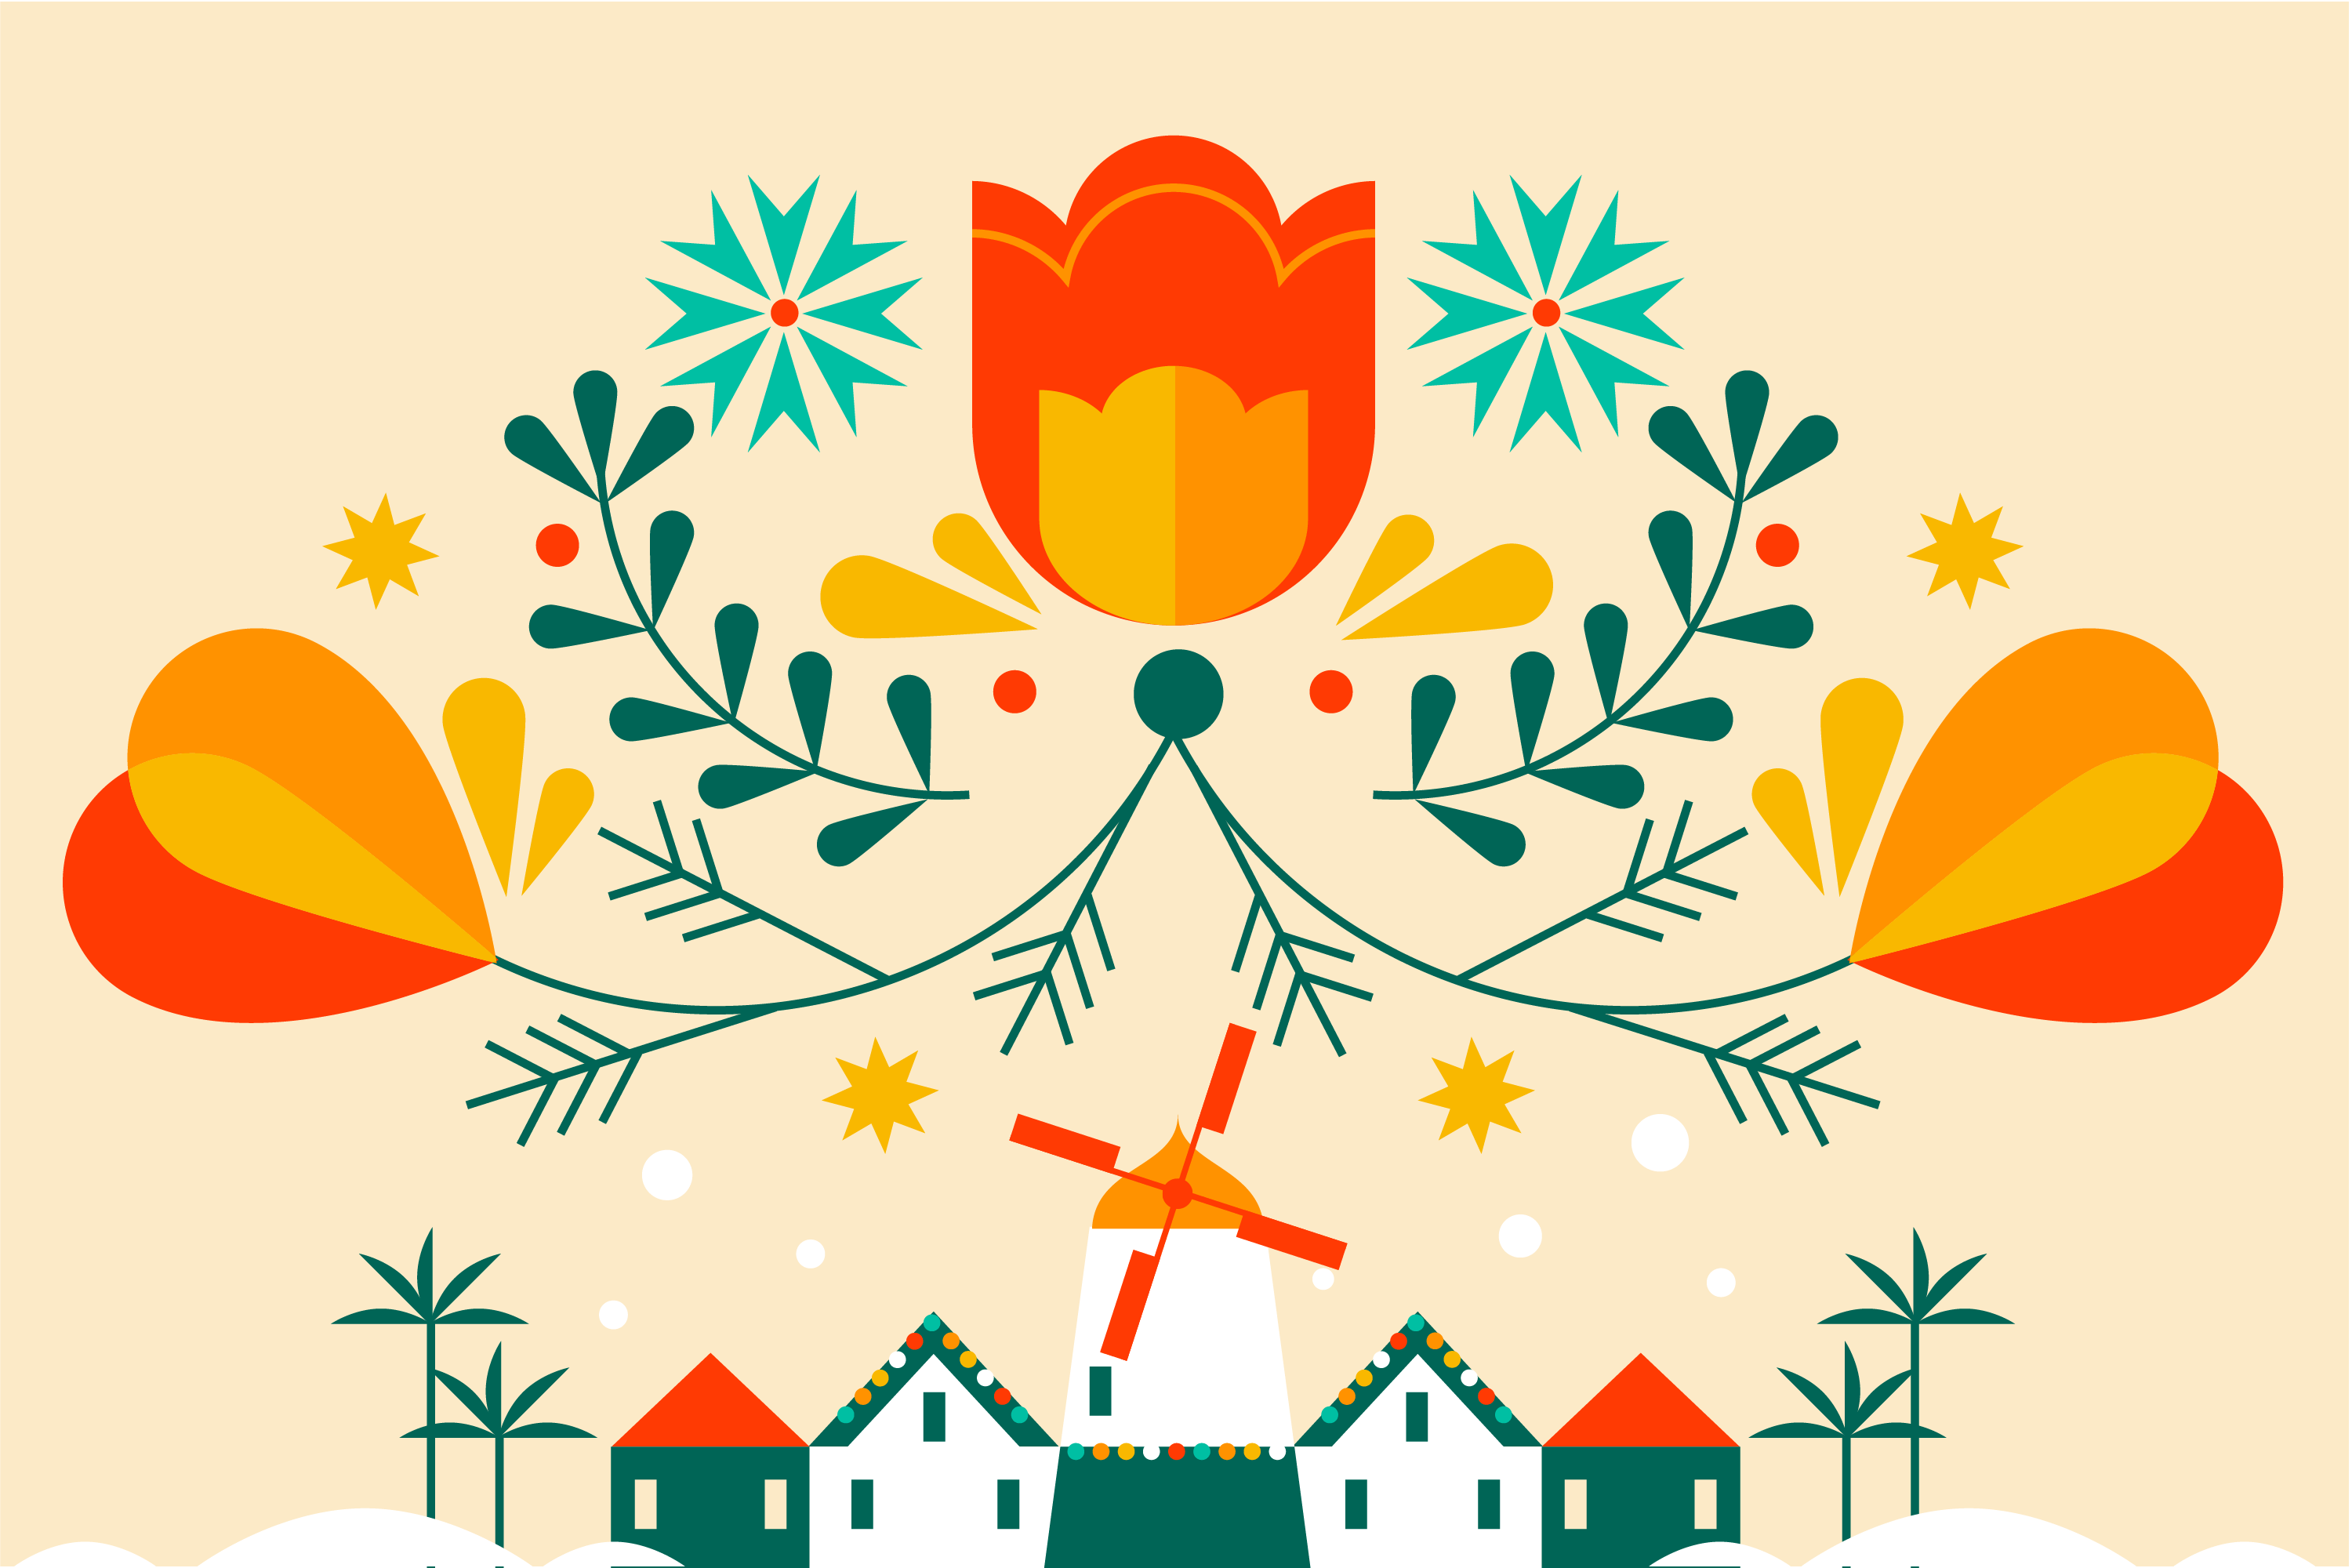 Illustration of a Scandinavian floral motif with California poppies over the town of Solvang, California.